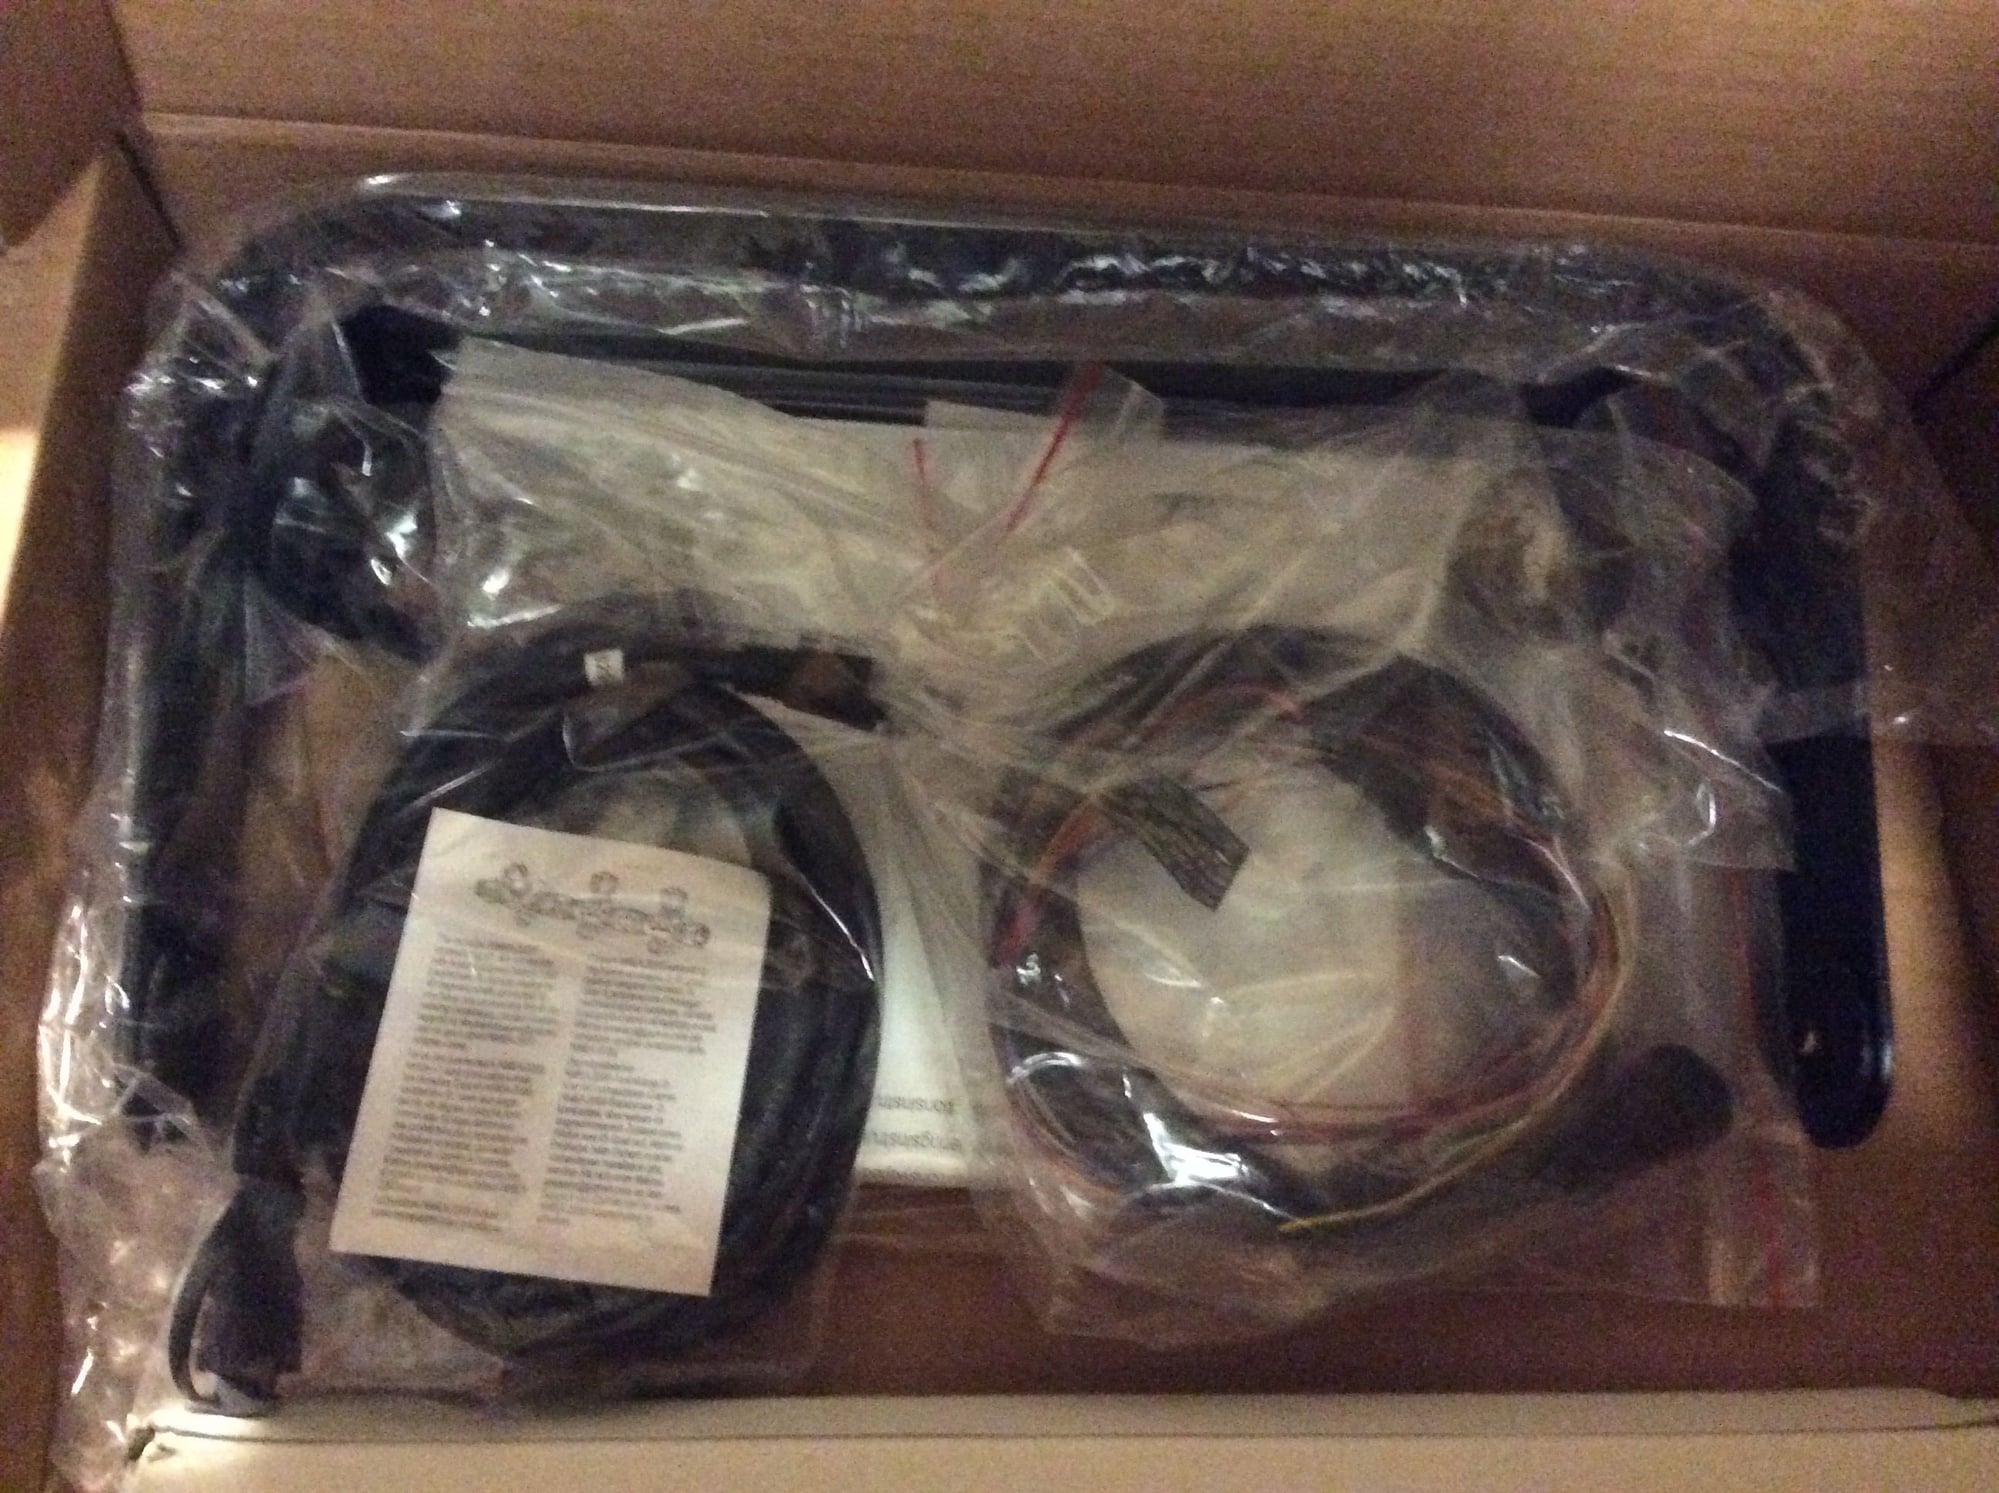 SOLD Garmin 7612 xsv 2 chirp transducers with warranty - The Hull Truth ...